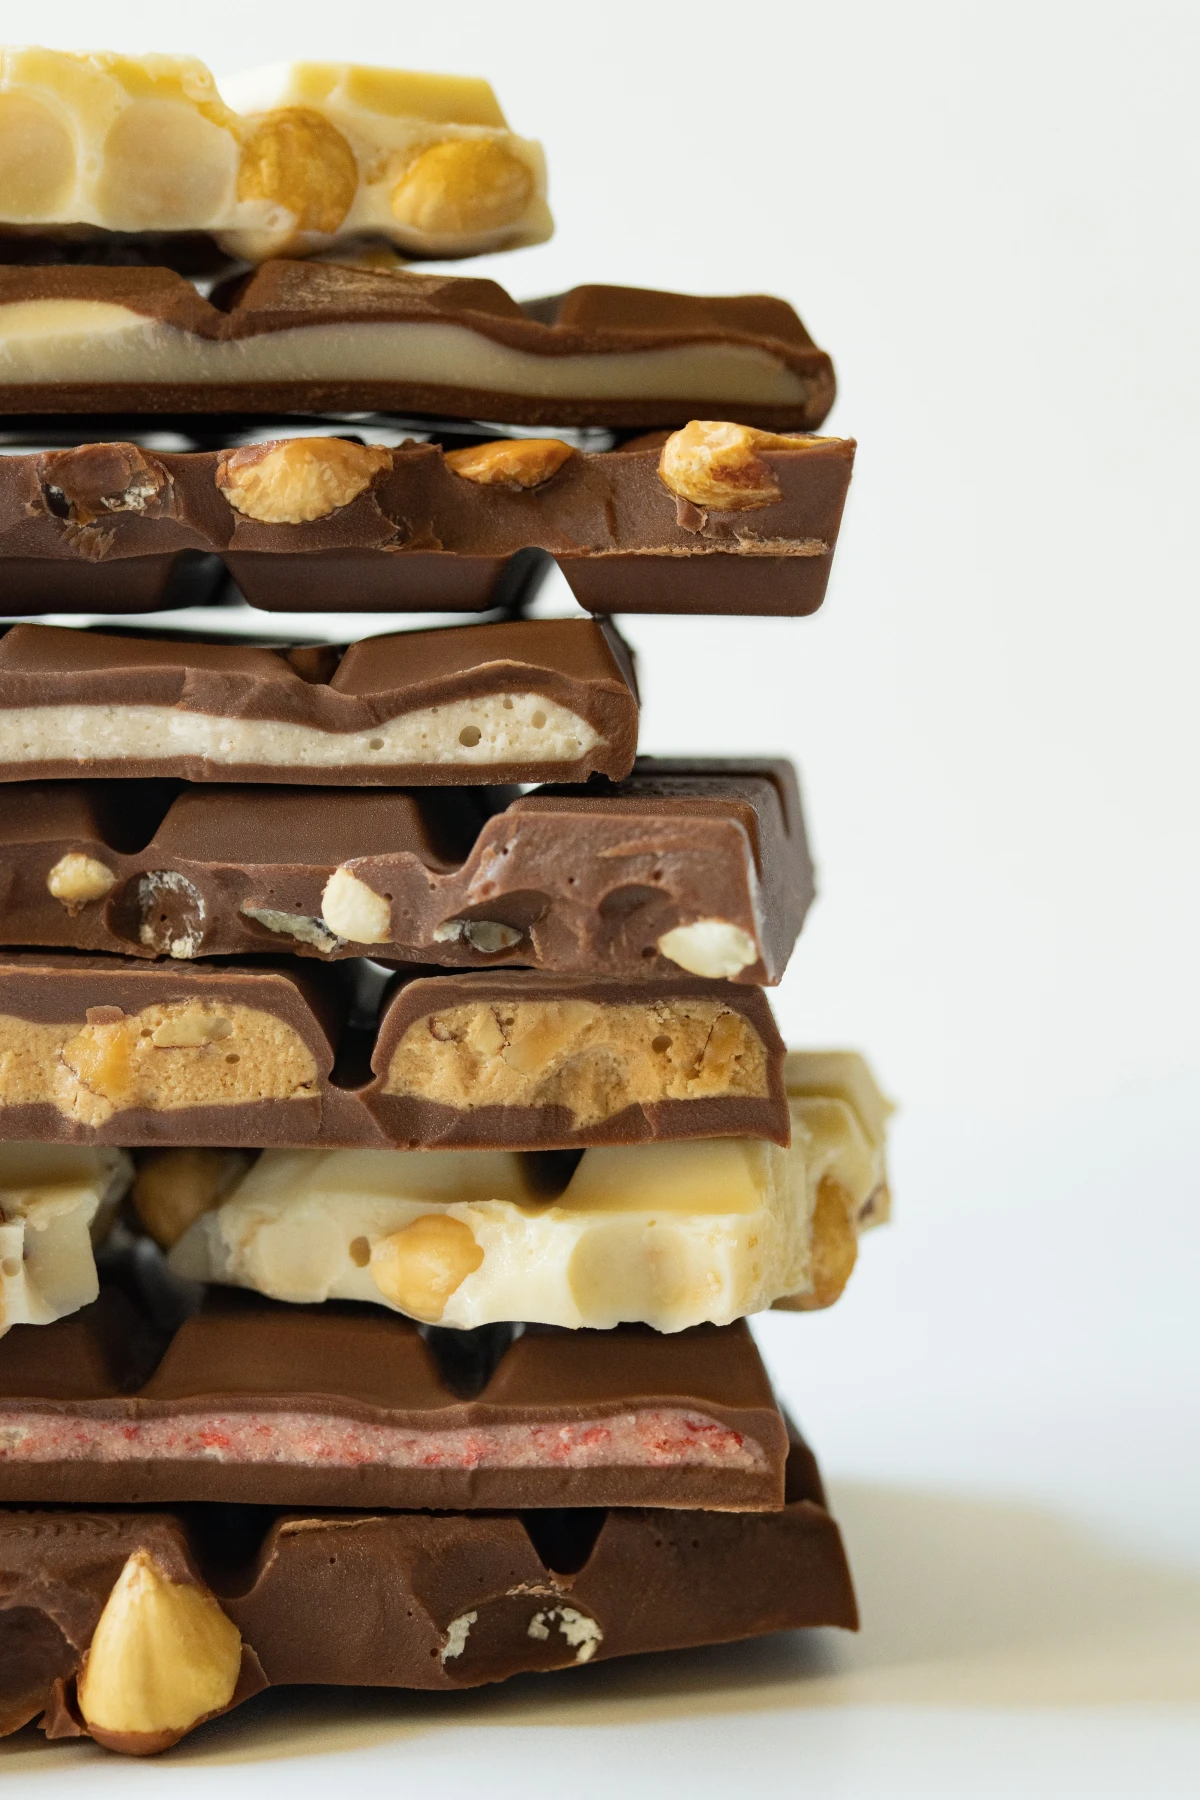 different types of chocolate bars stacked